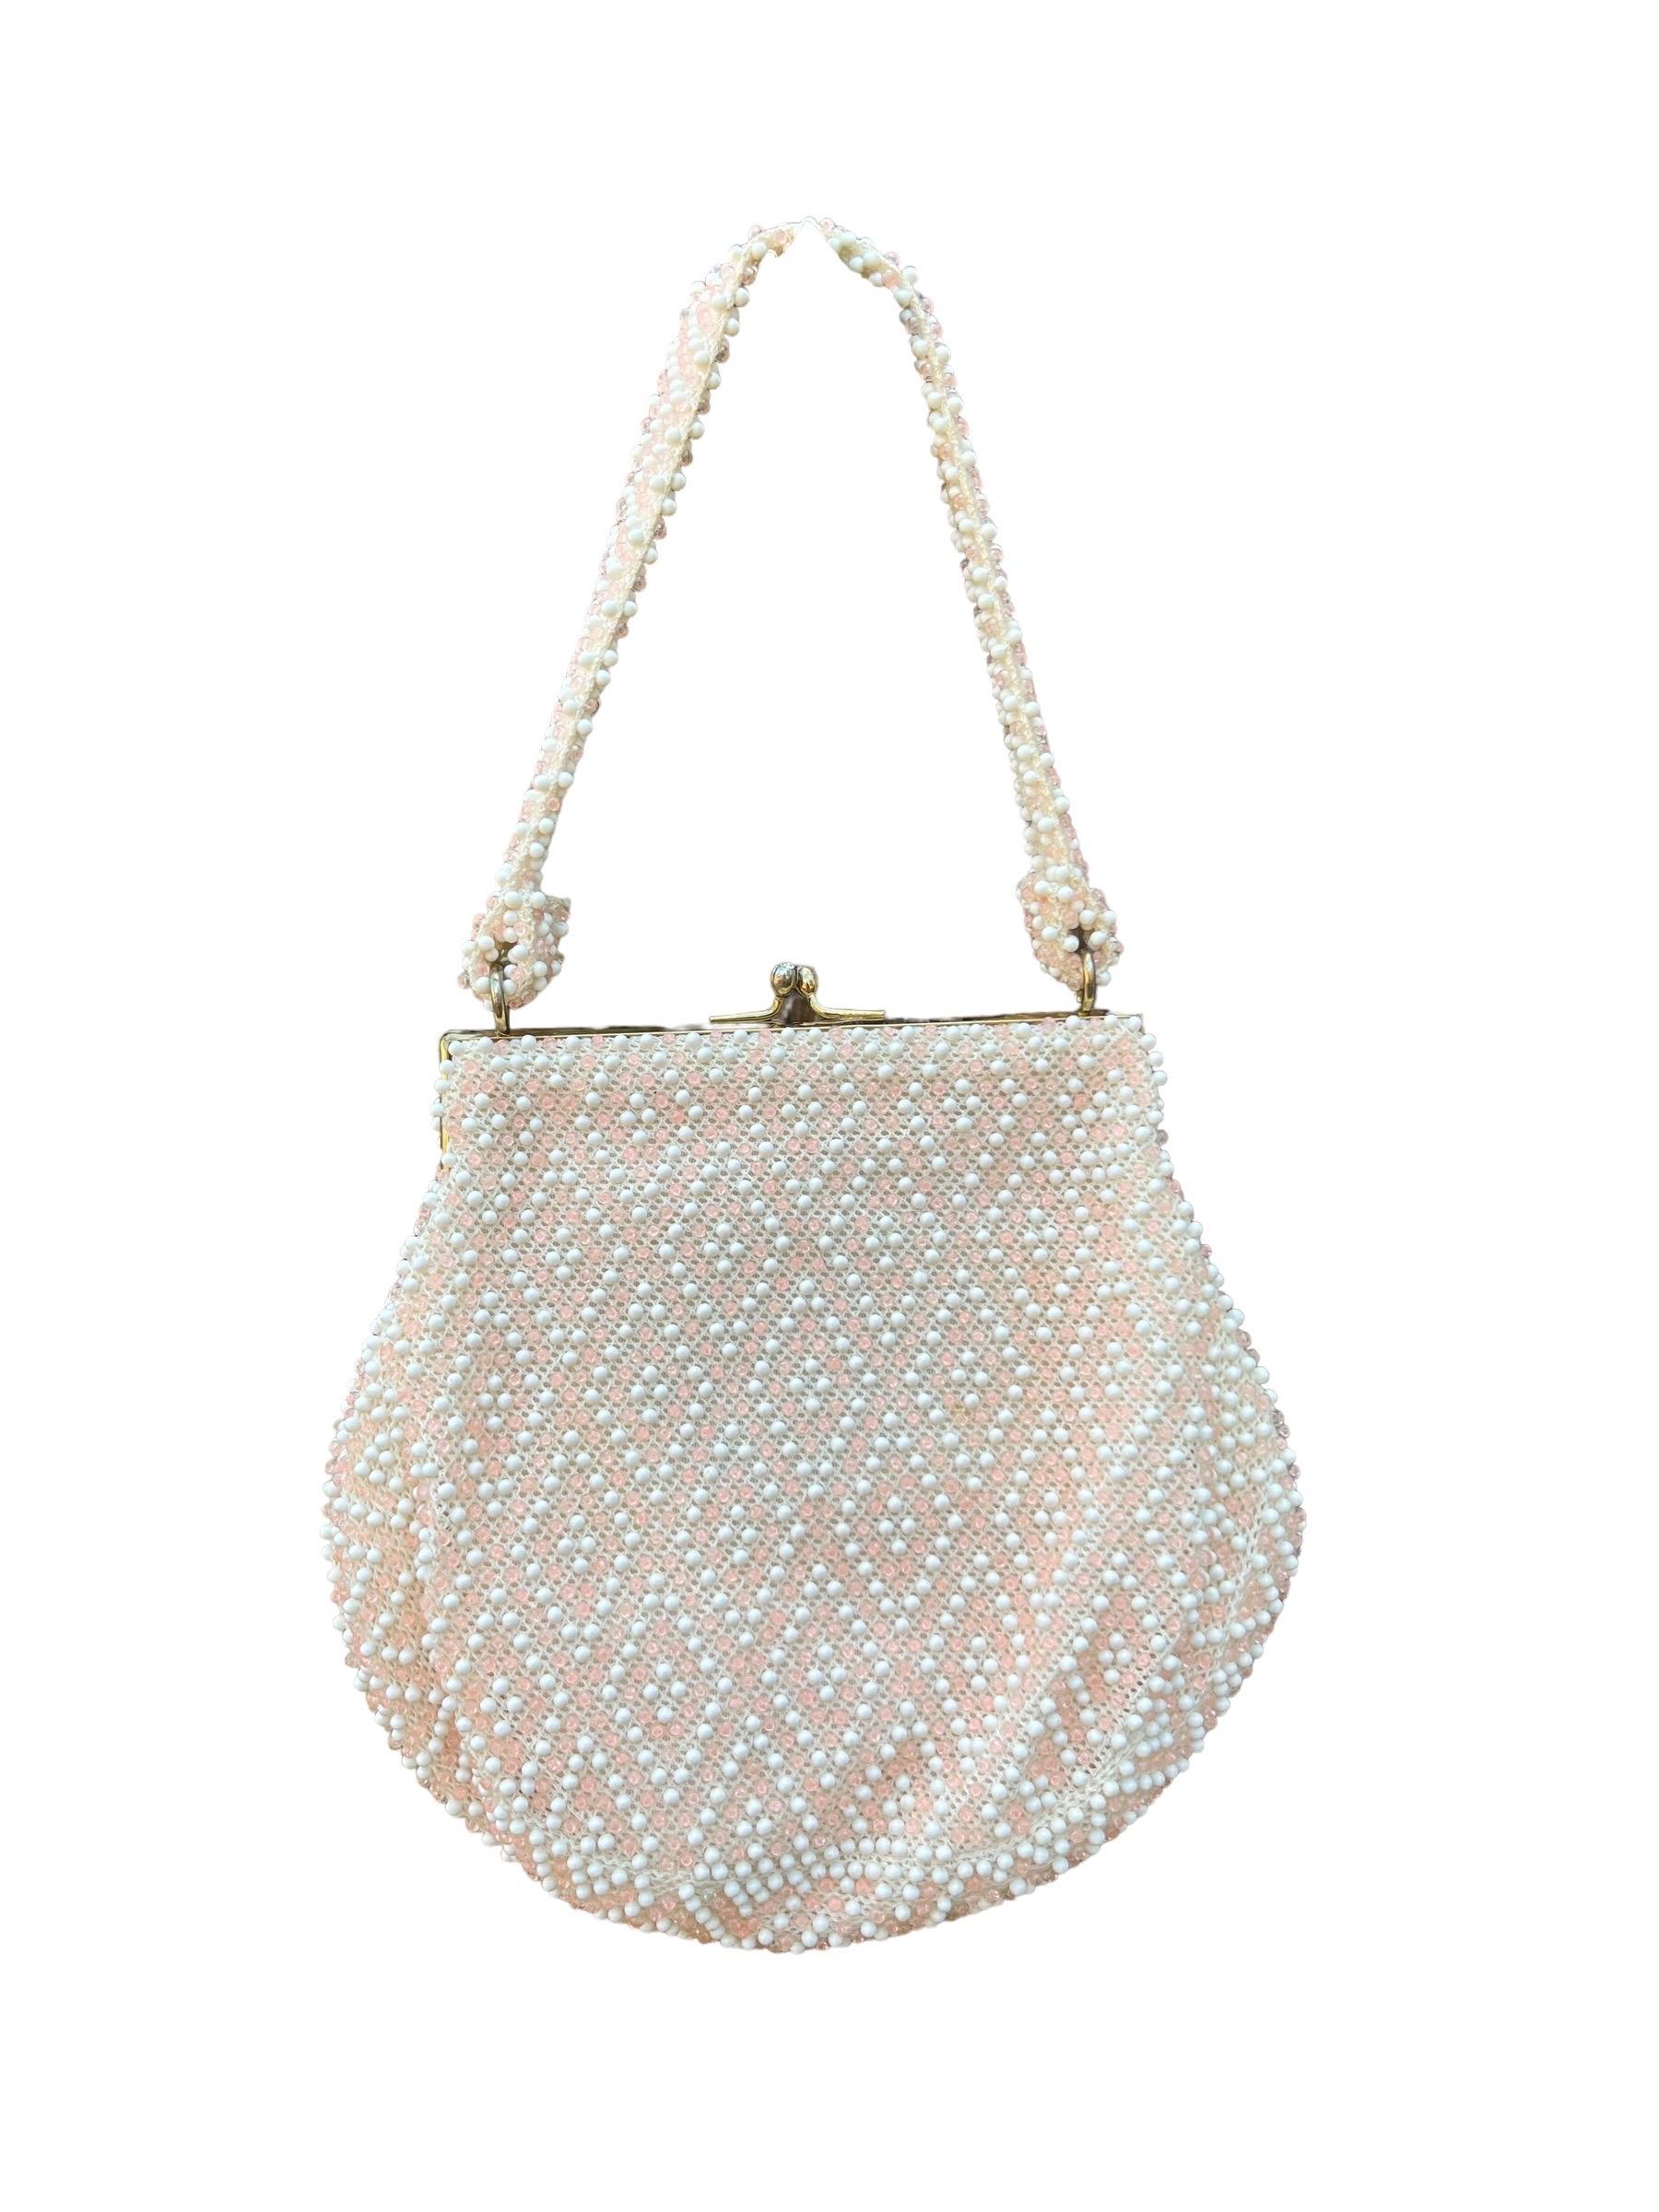 1950’s Light Pink Corde-Bead Bubble Handbag by Lumured For Sale 2